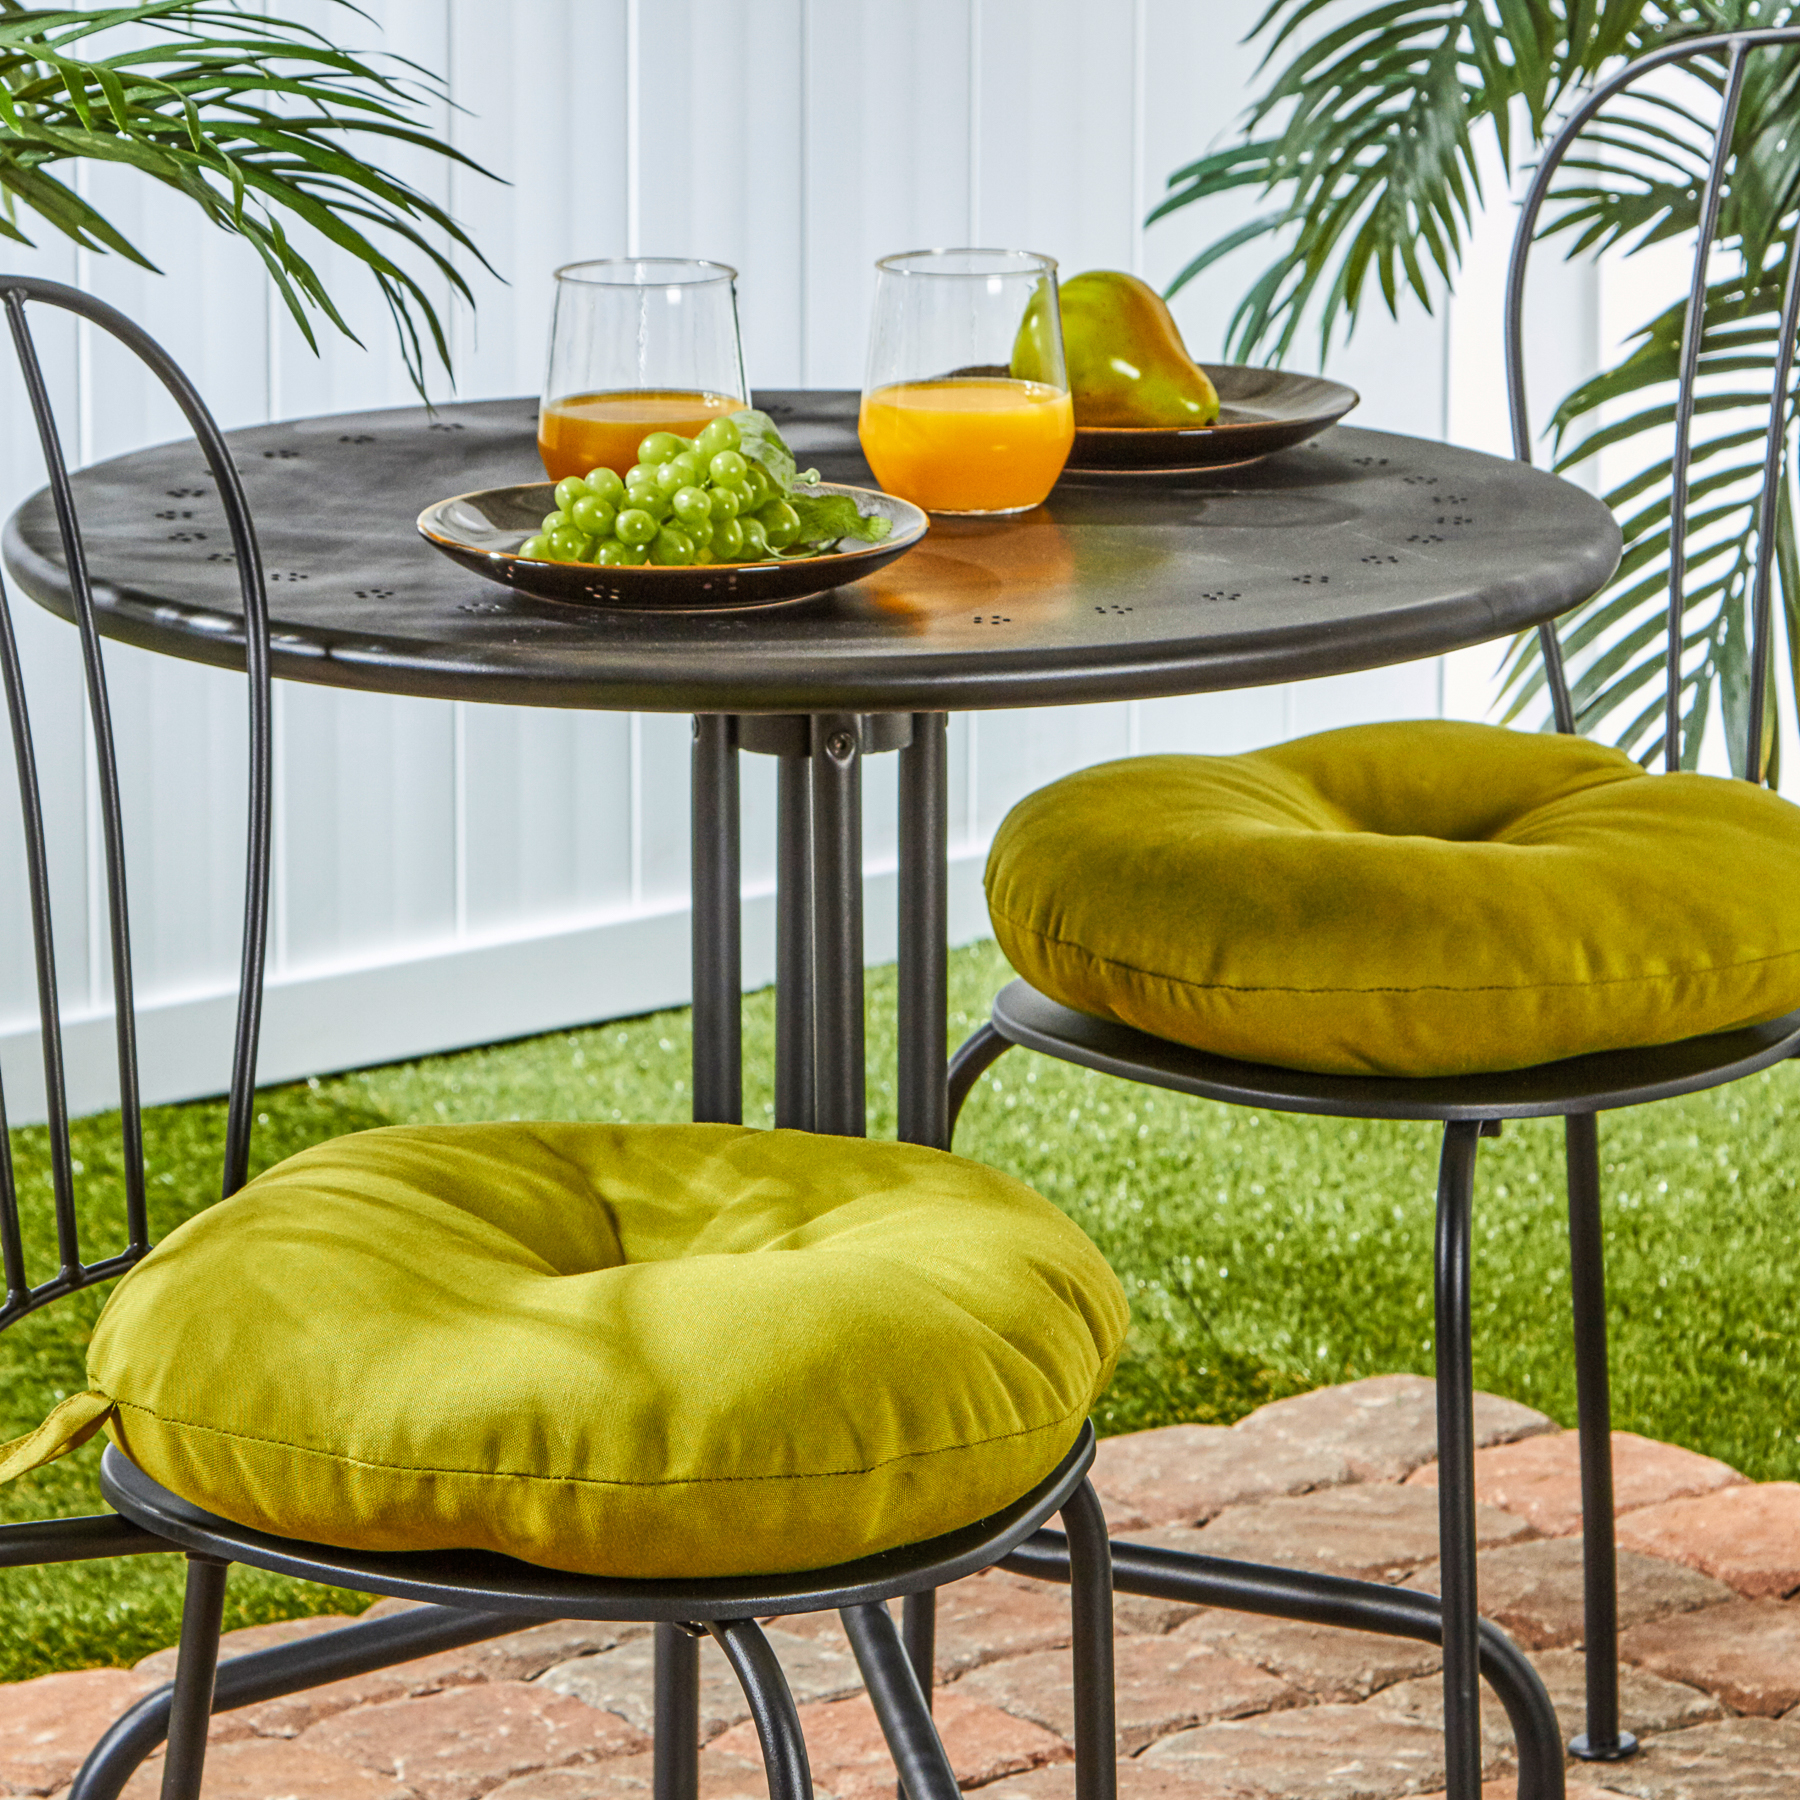 Greendale Home Fashions Kiwi Green 15 in. Round Outdoor Reversible Bistro Seat Cushion (Set of 2) - image 5 of 6